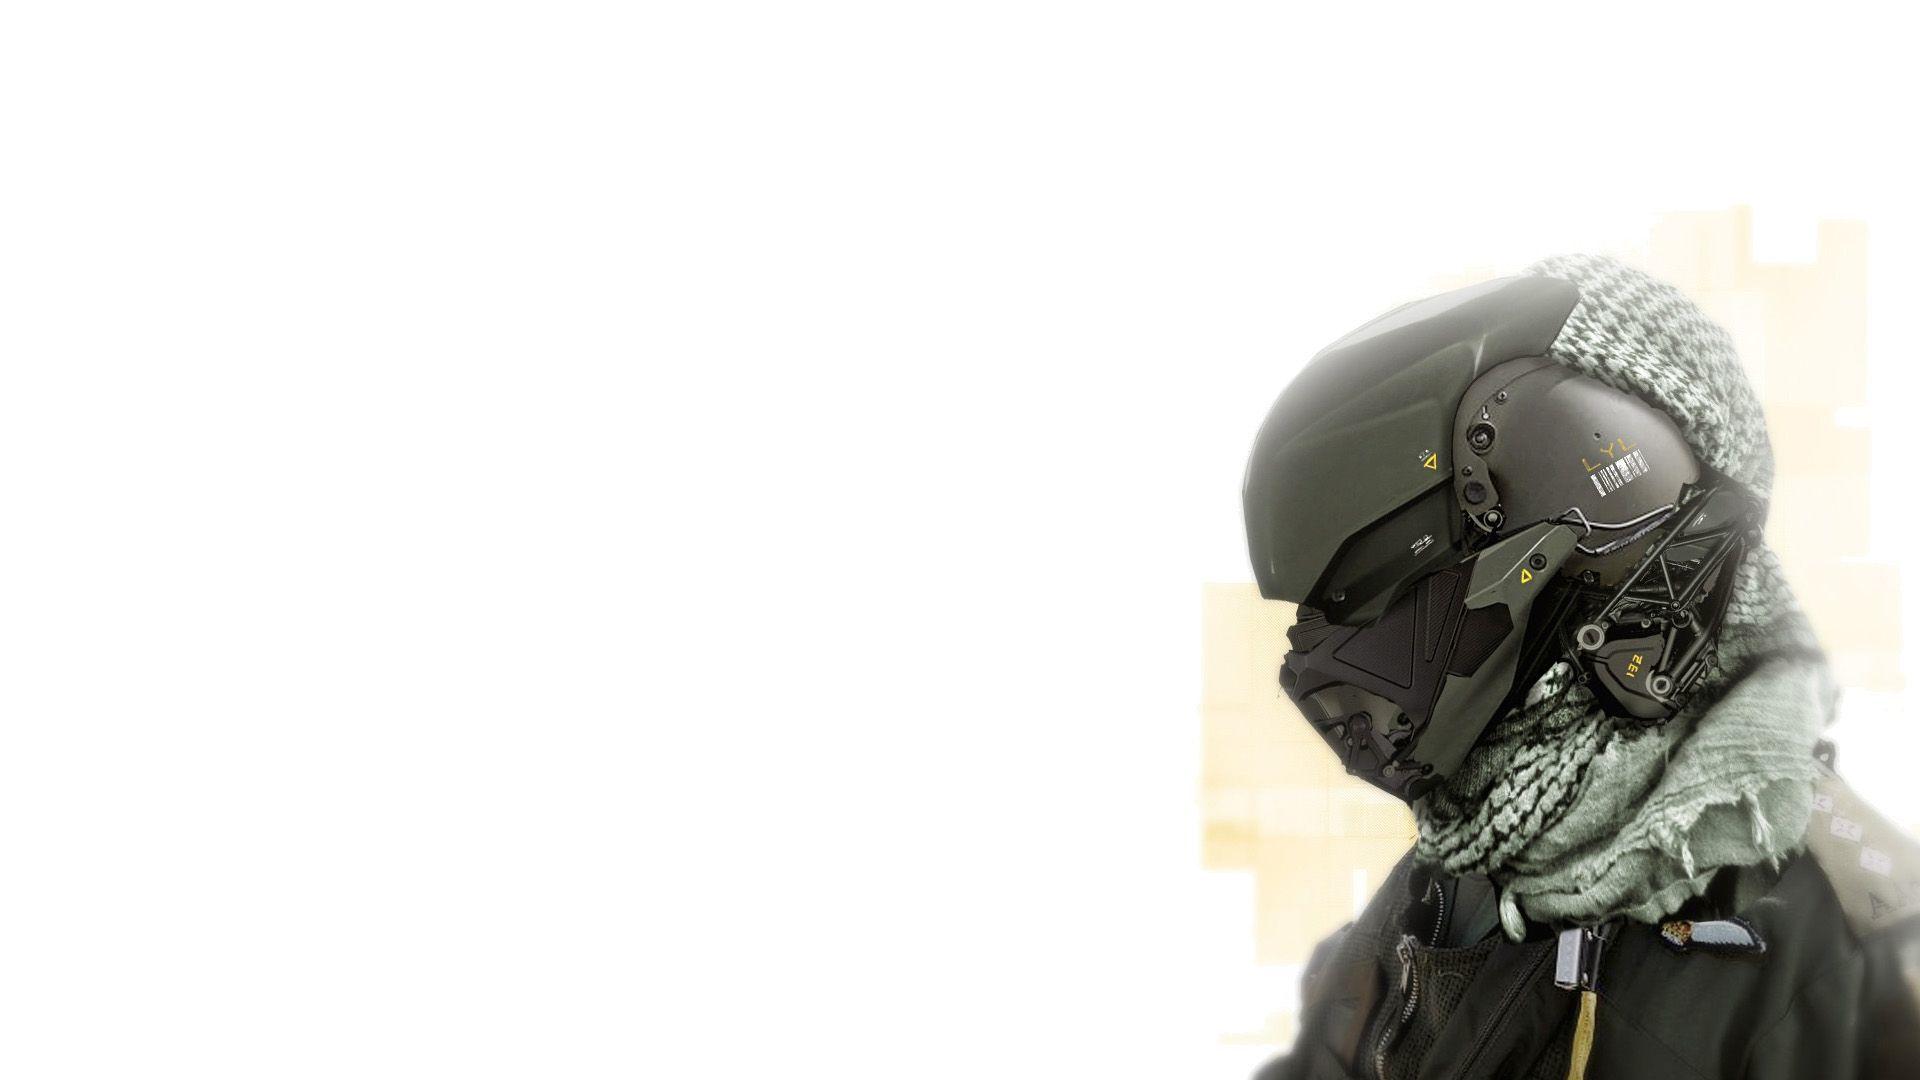 General 1920x1080 soldier robot futuristic simple background